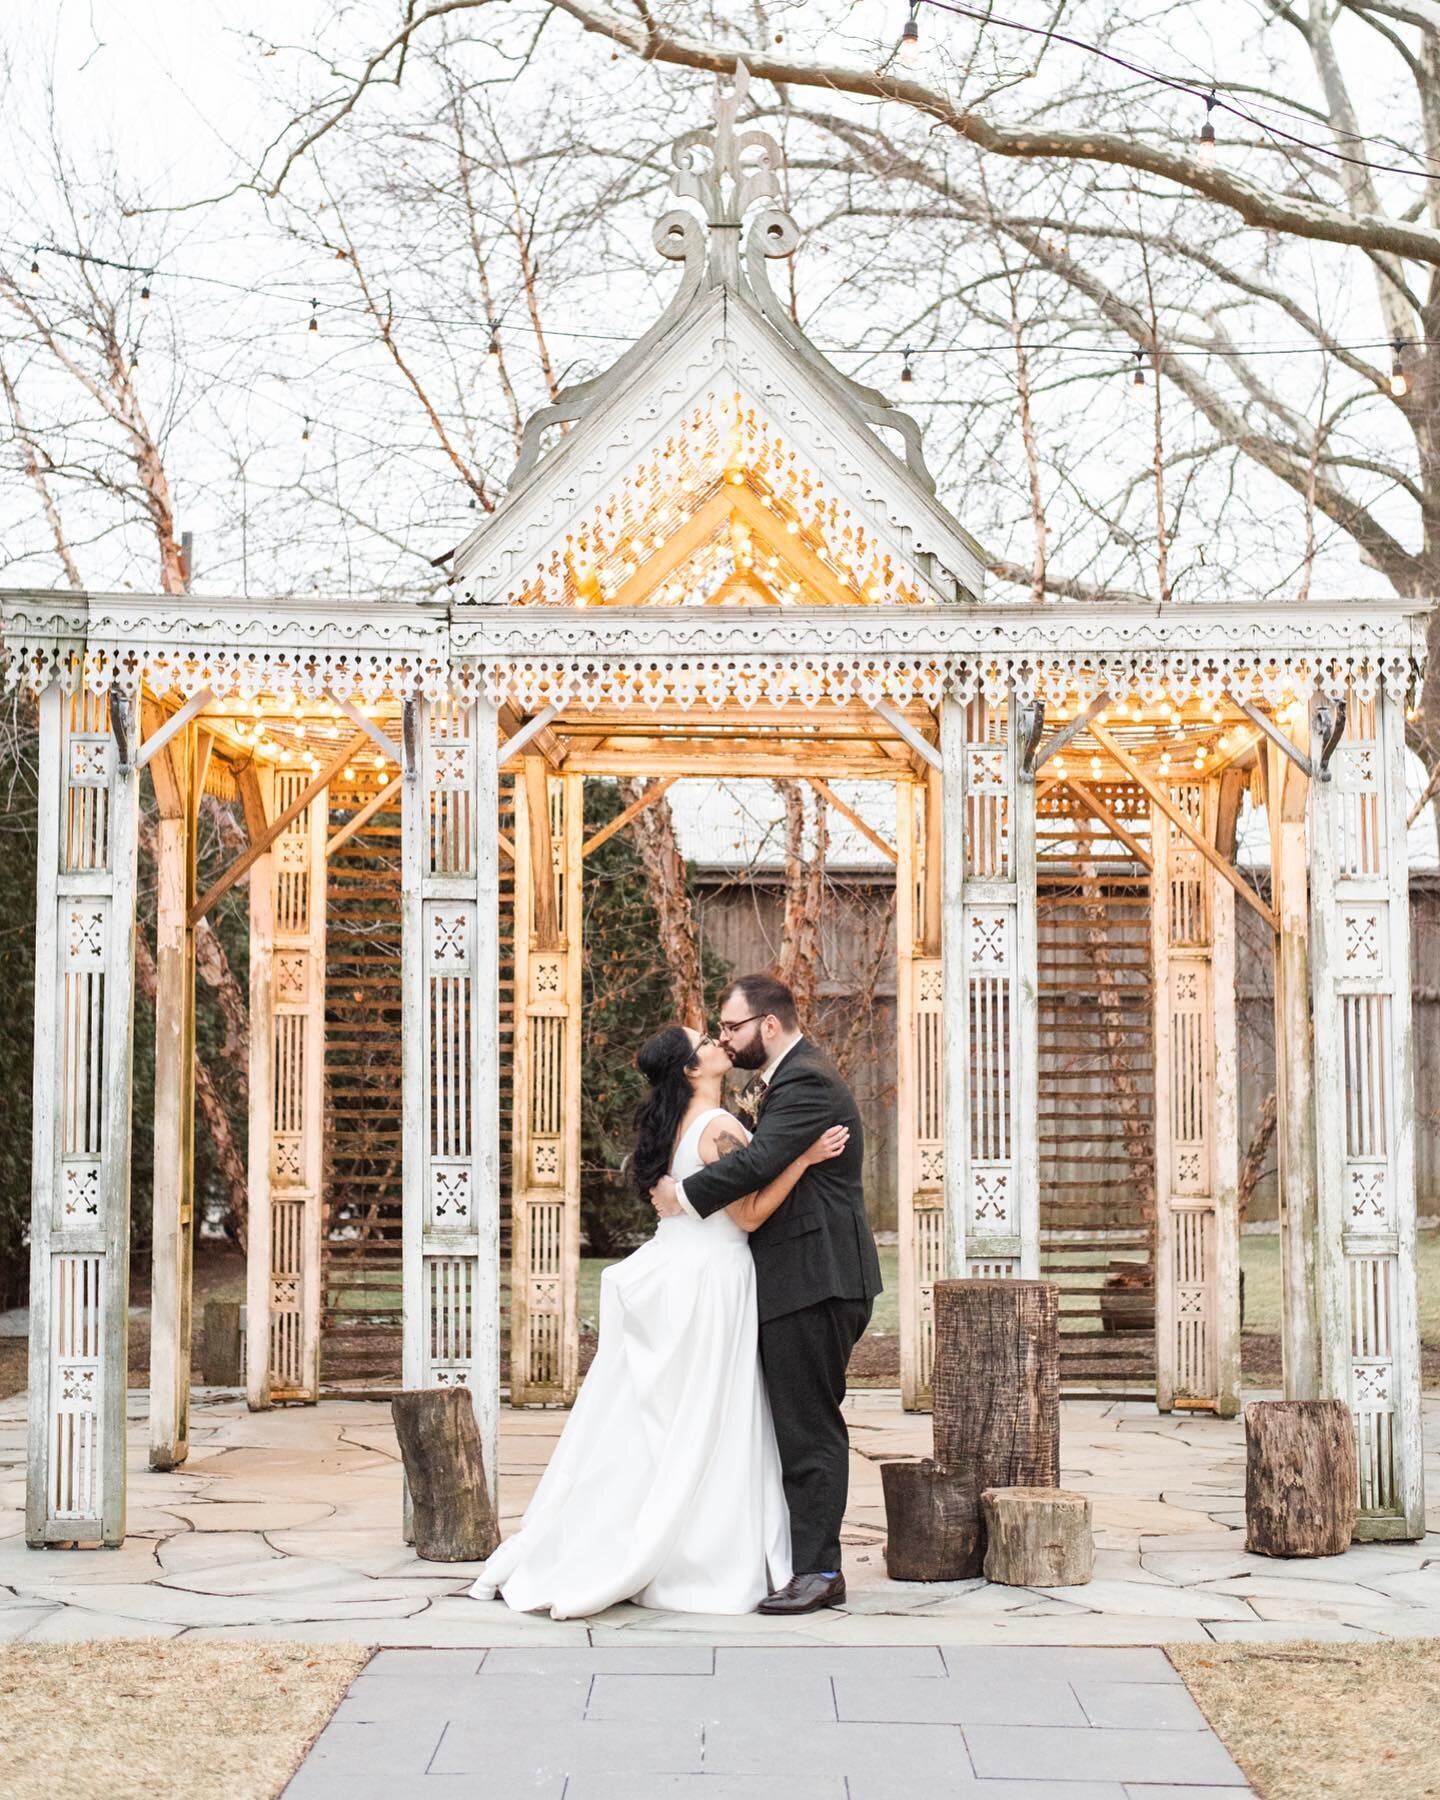 Together is a beautiful place to be ✨
 
Venue + Caterer | @terrain_events
Hair and Makeup | @earthtonesartistry
Dress | @missstellayork
Bridesmaid Dresses | @shoprevelry
Music | @patandseankelly
Cake | @the_sugary
Rings | @brilliantearth
Signs | @cre